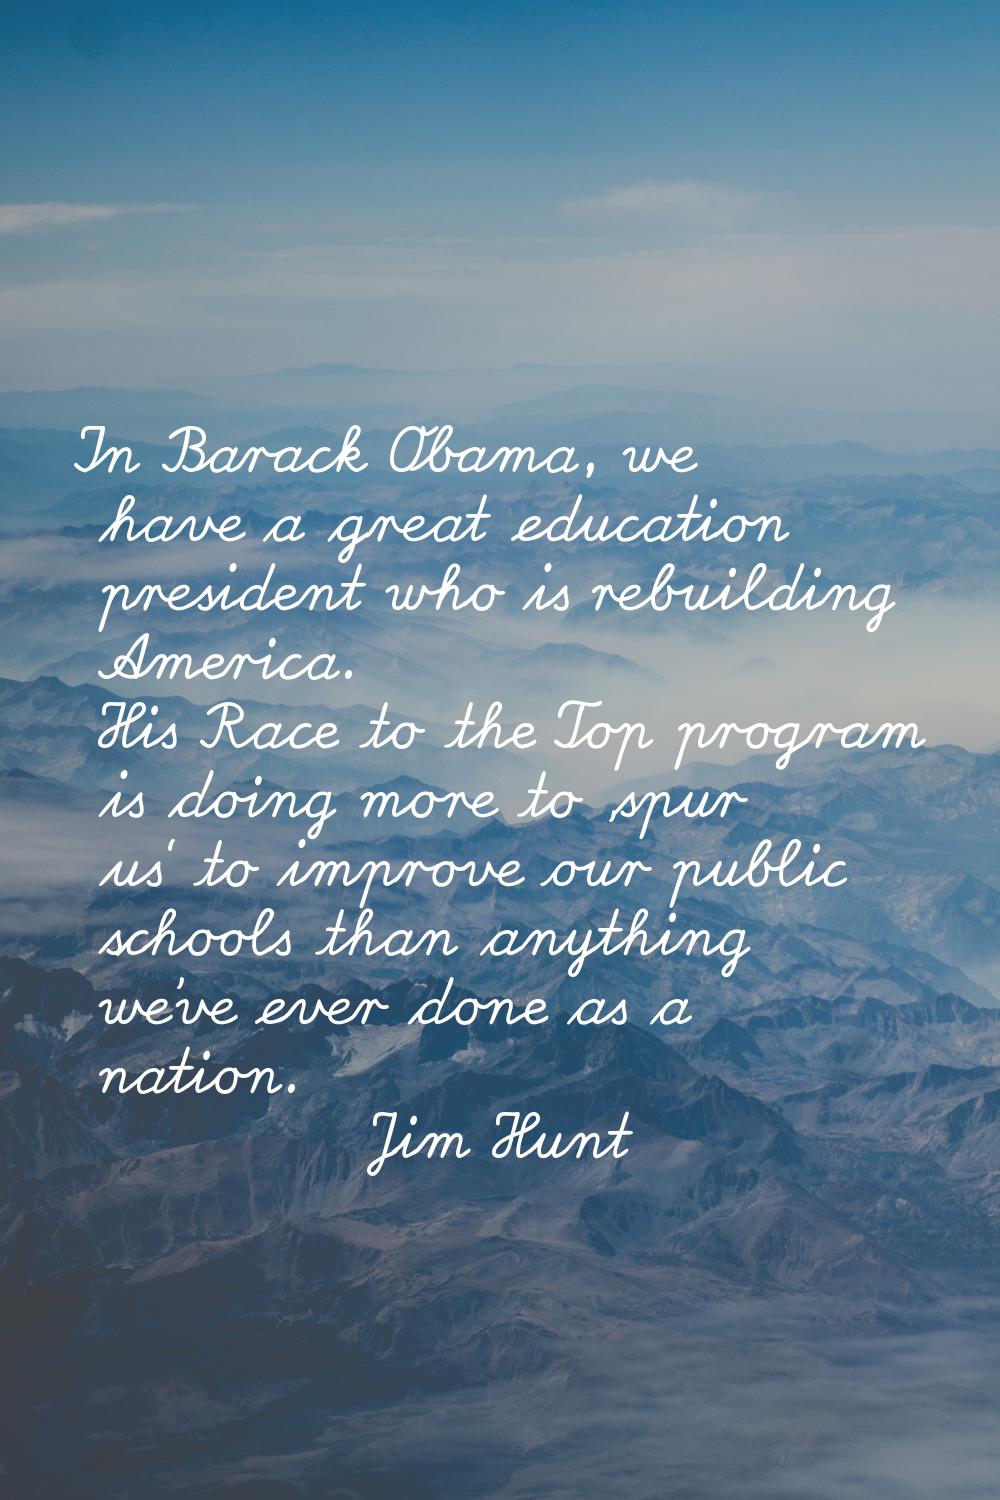 In Barack Obama, we have a great education president who is rebuilding America. His Race to the Top